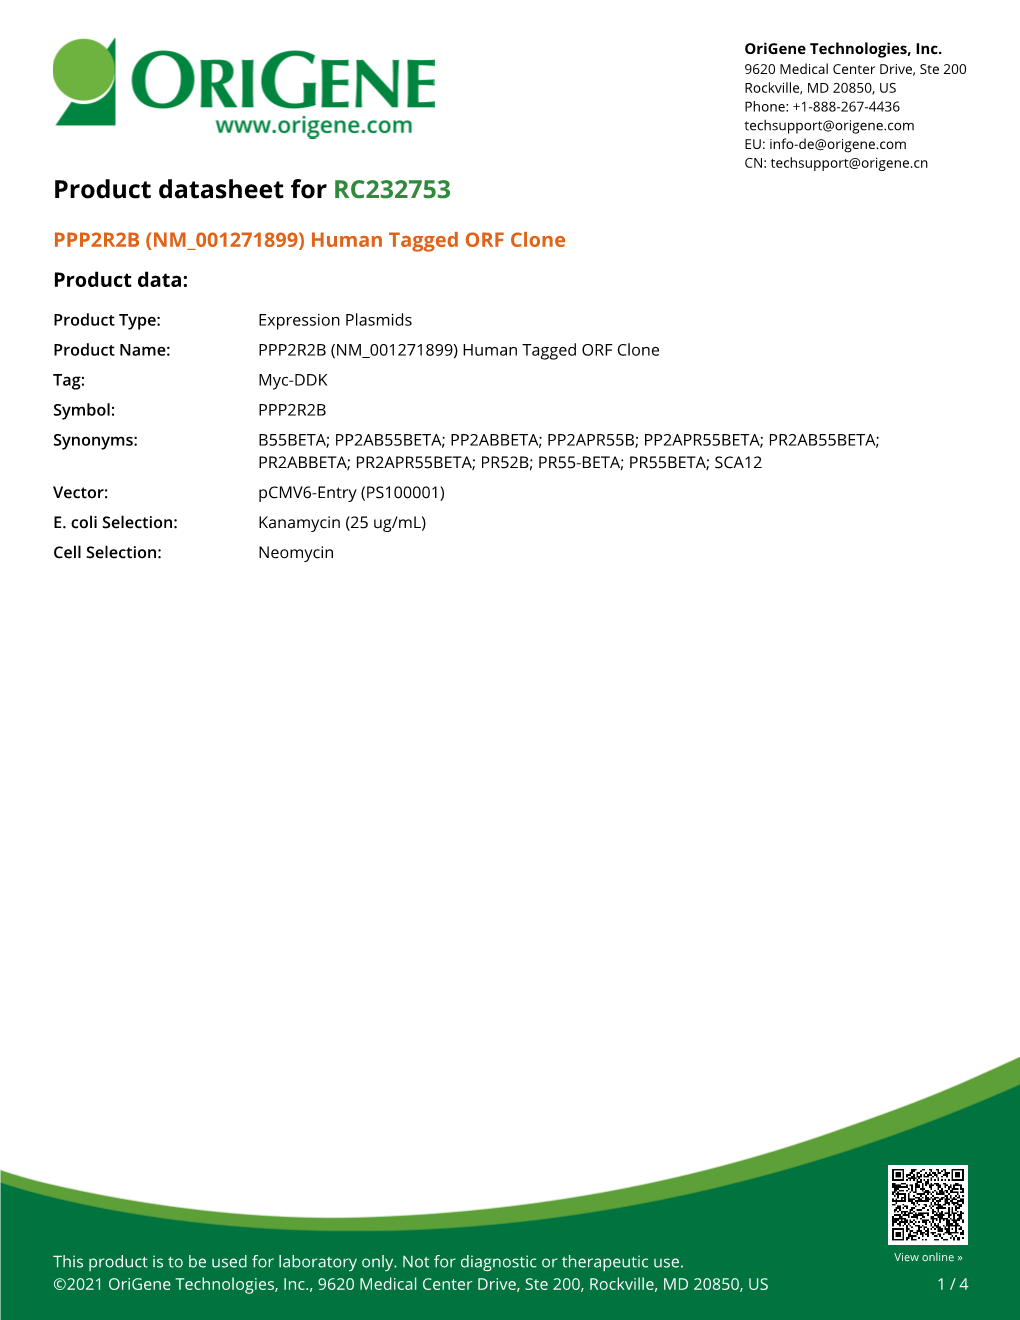 PPP2R2B (NM 001271899) Human Tagged ORF Clone Product Data